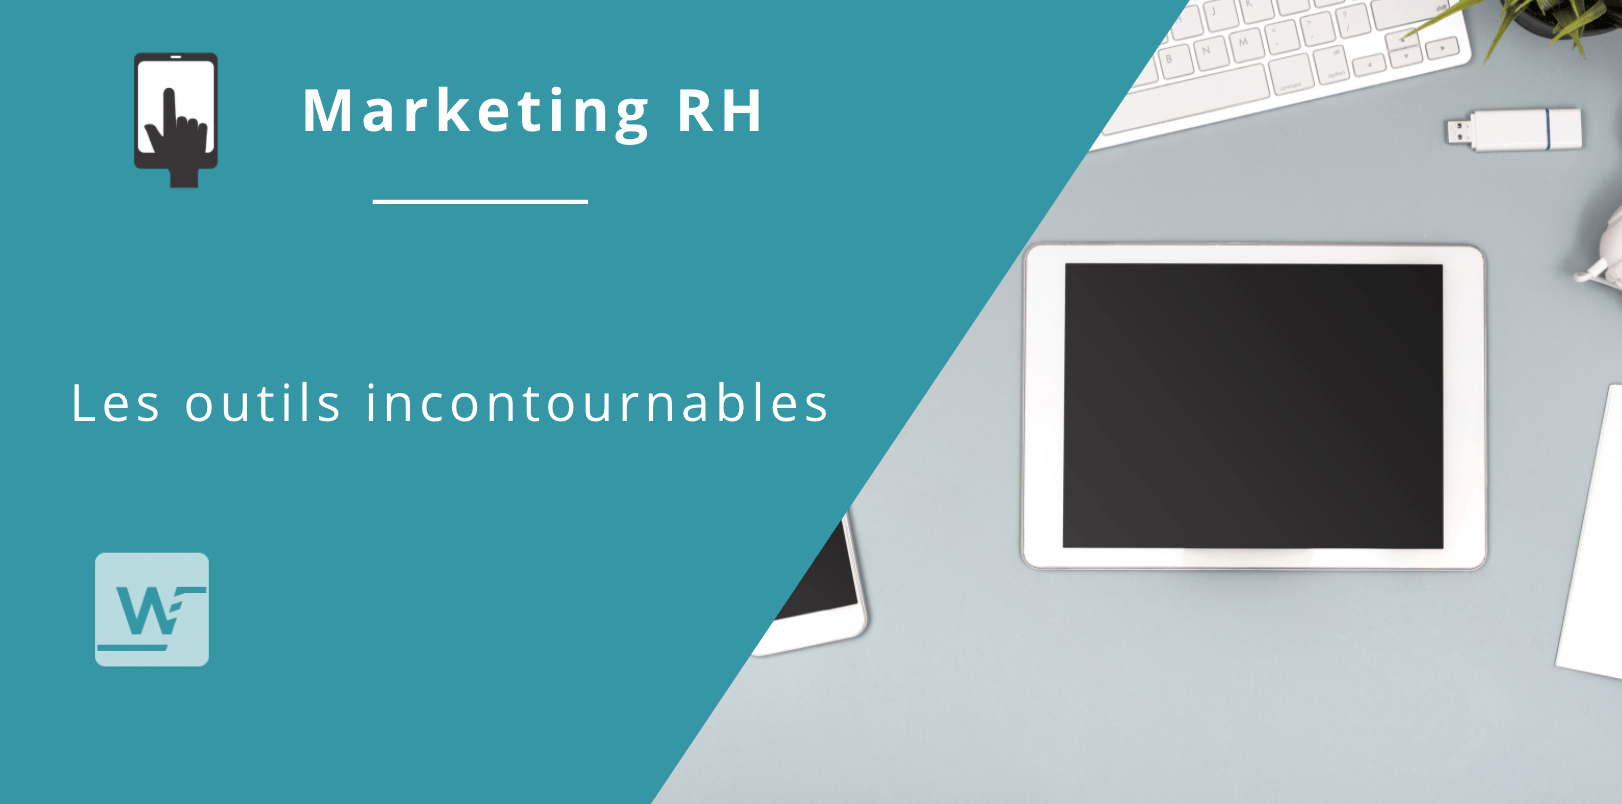 Marketing RH : outils incontournables